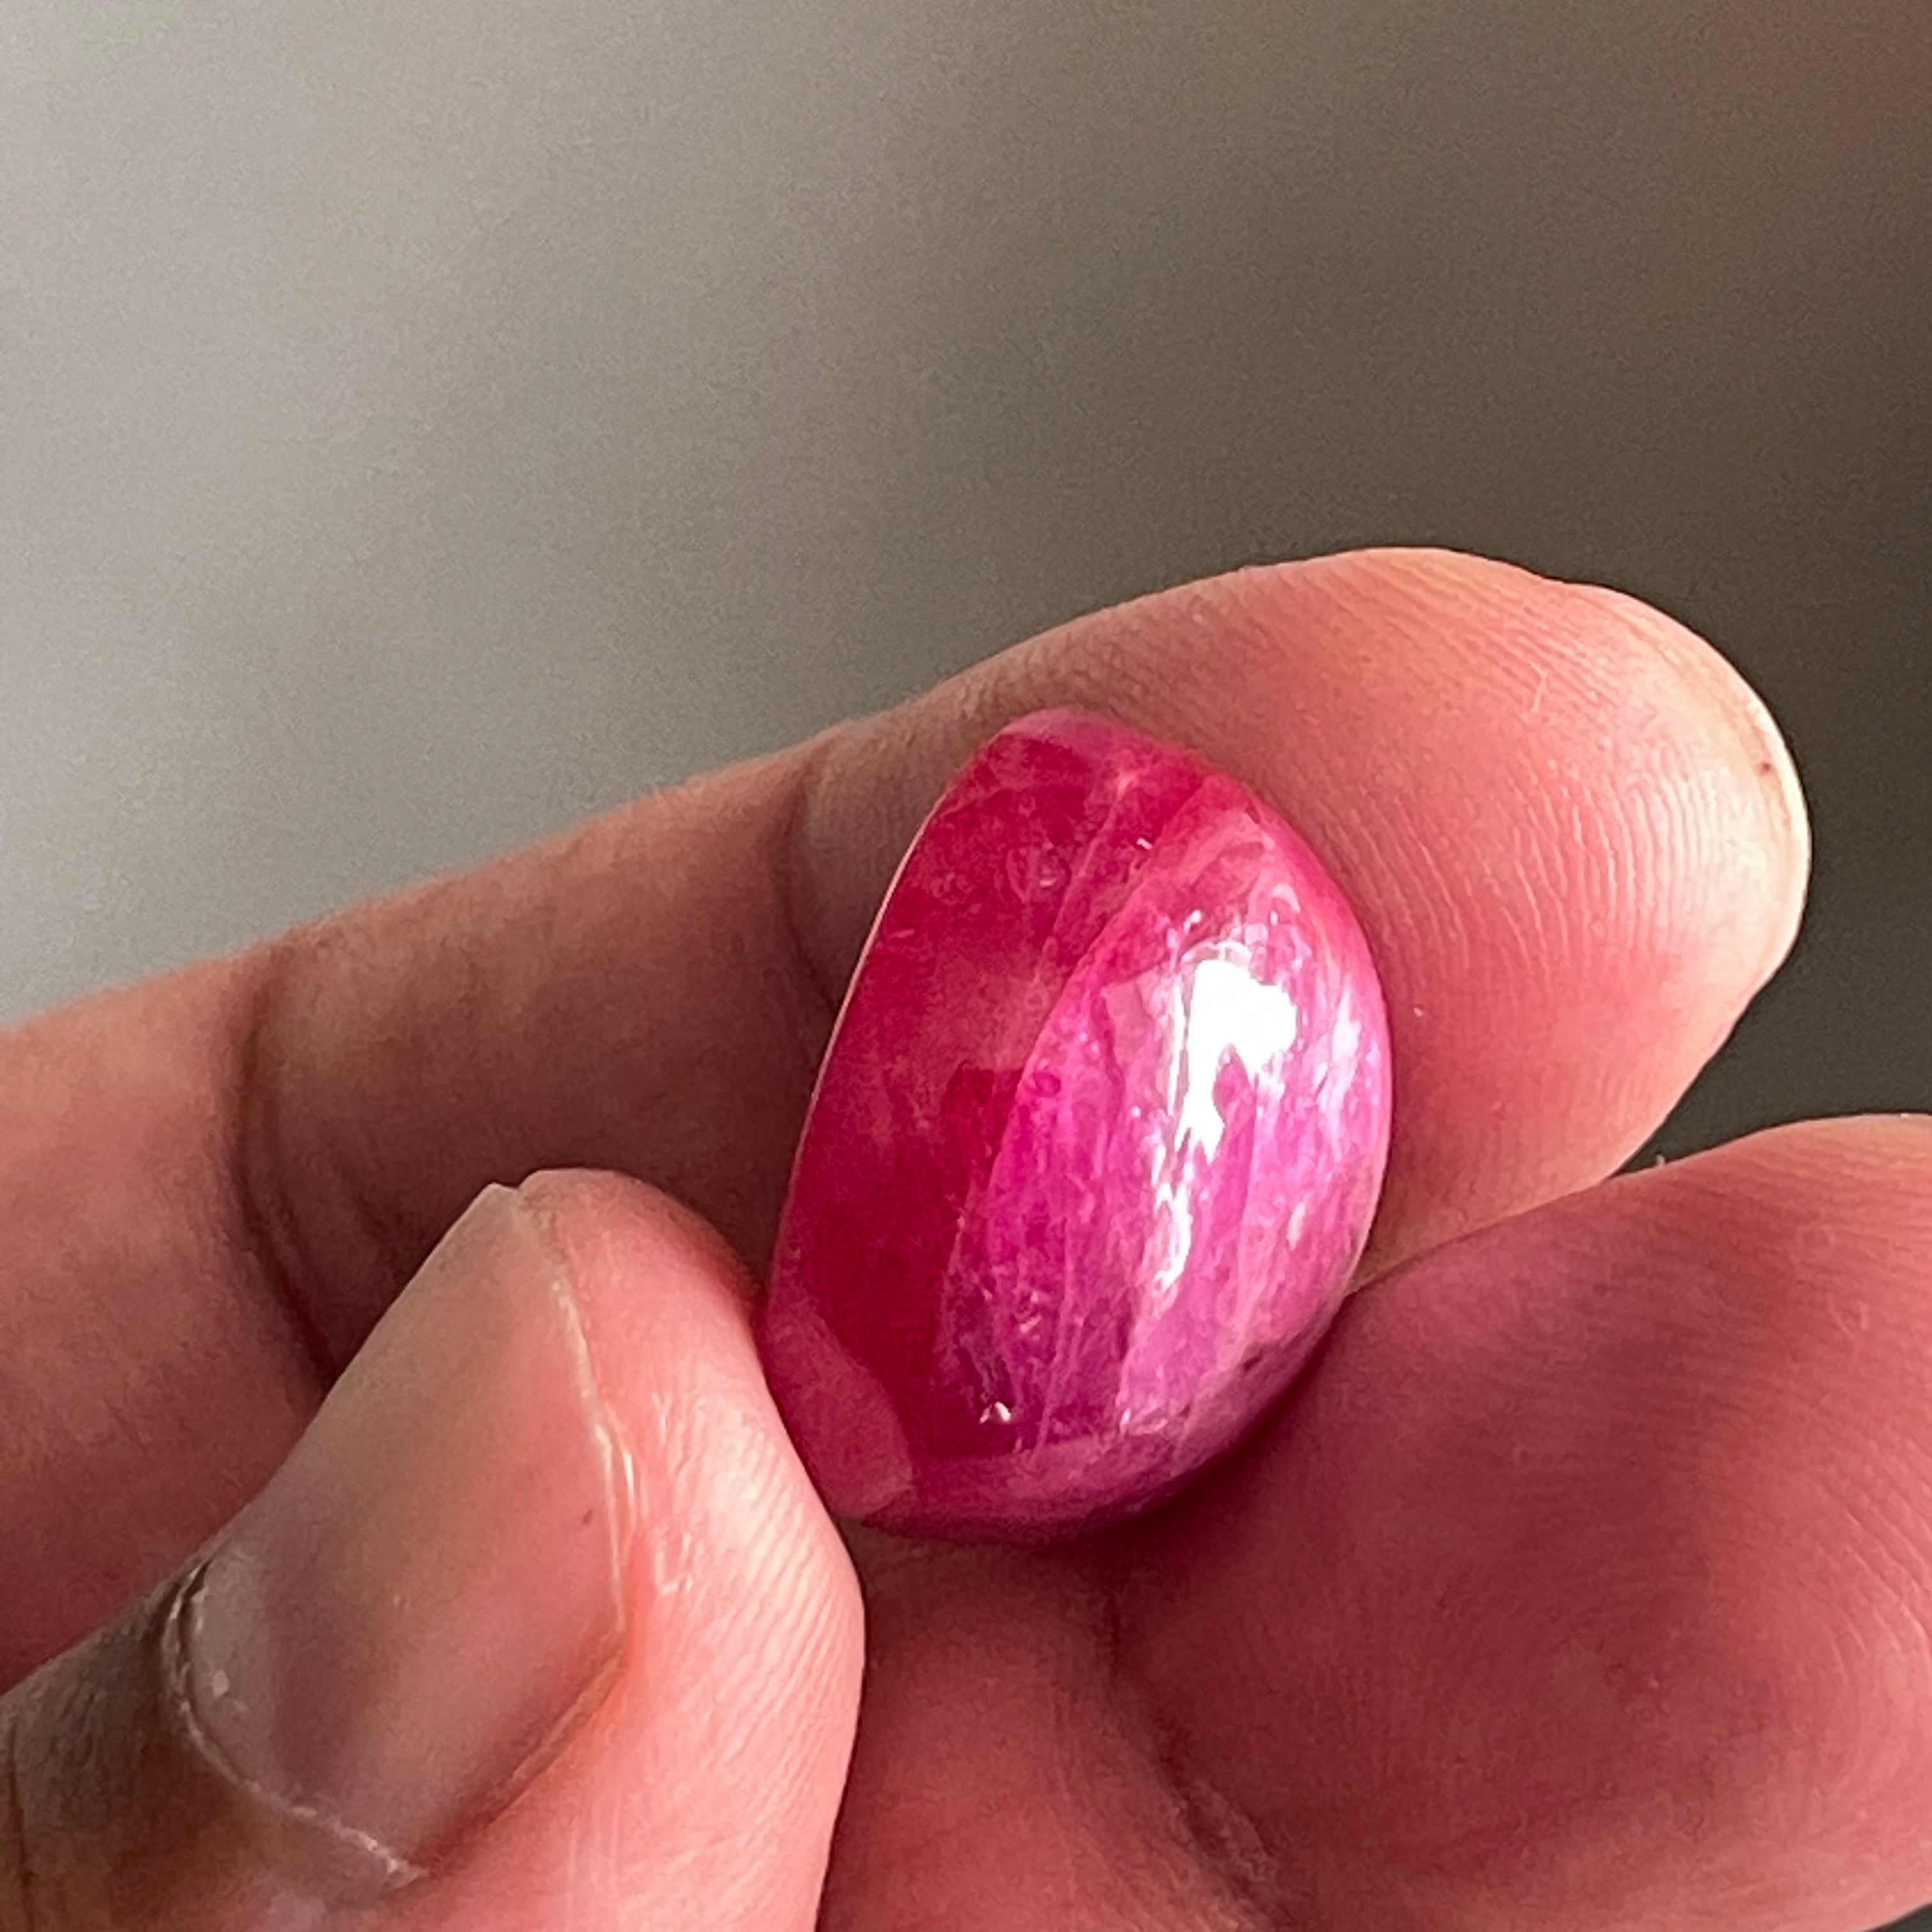 38.86Ct Ruby Untreated Unheated From A Special Location In Kenya Called Lake Turkana. Beautiful